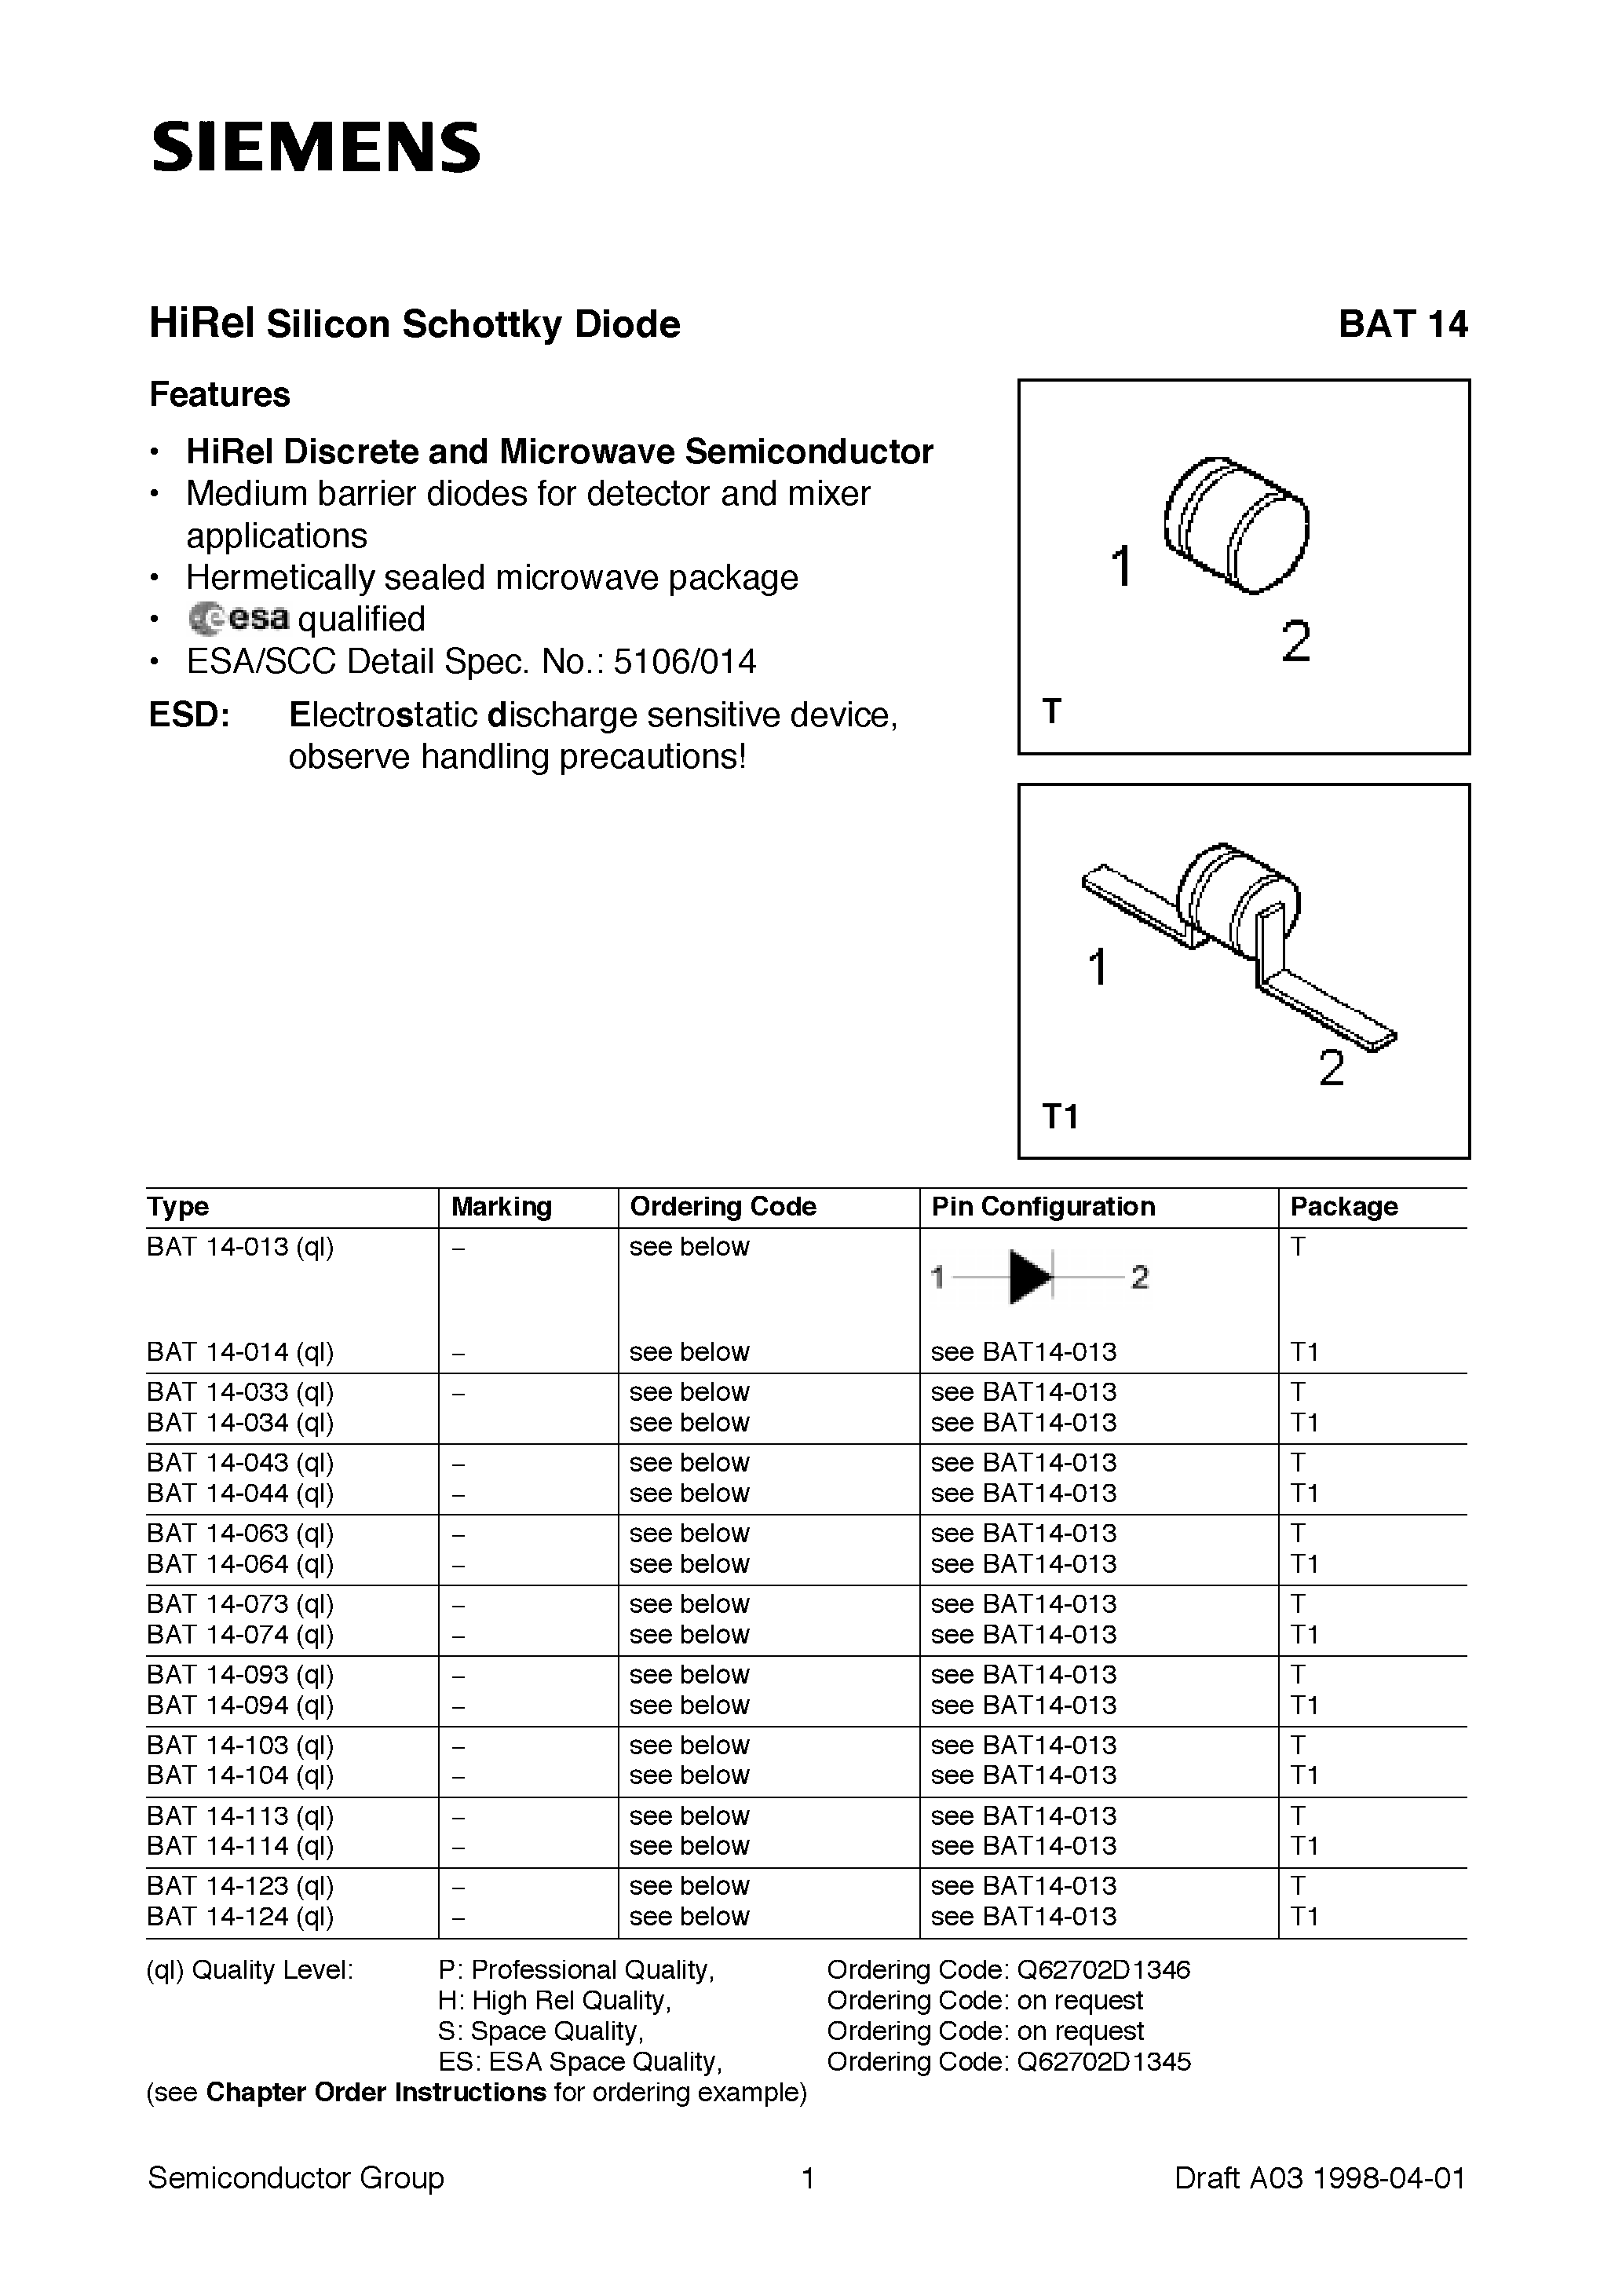 Datasheet BAT14-093 - HiRel Silicon Schottky Diode (HiRel Discrete and Microwave Semiconductor Medium barrier diodes for detector and mixer applications) page 1